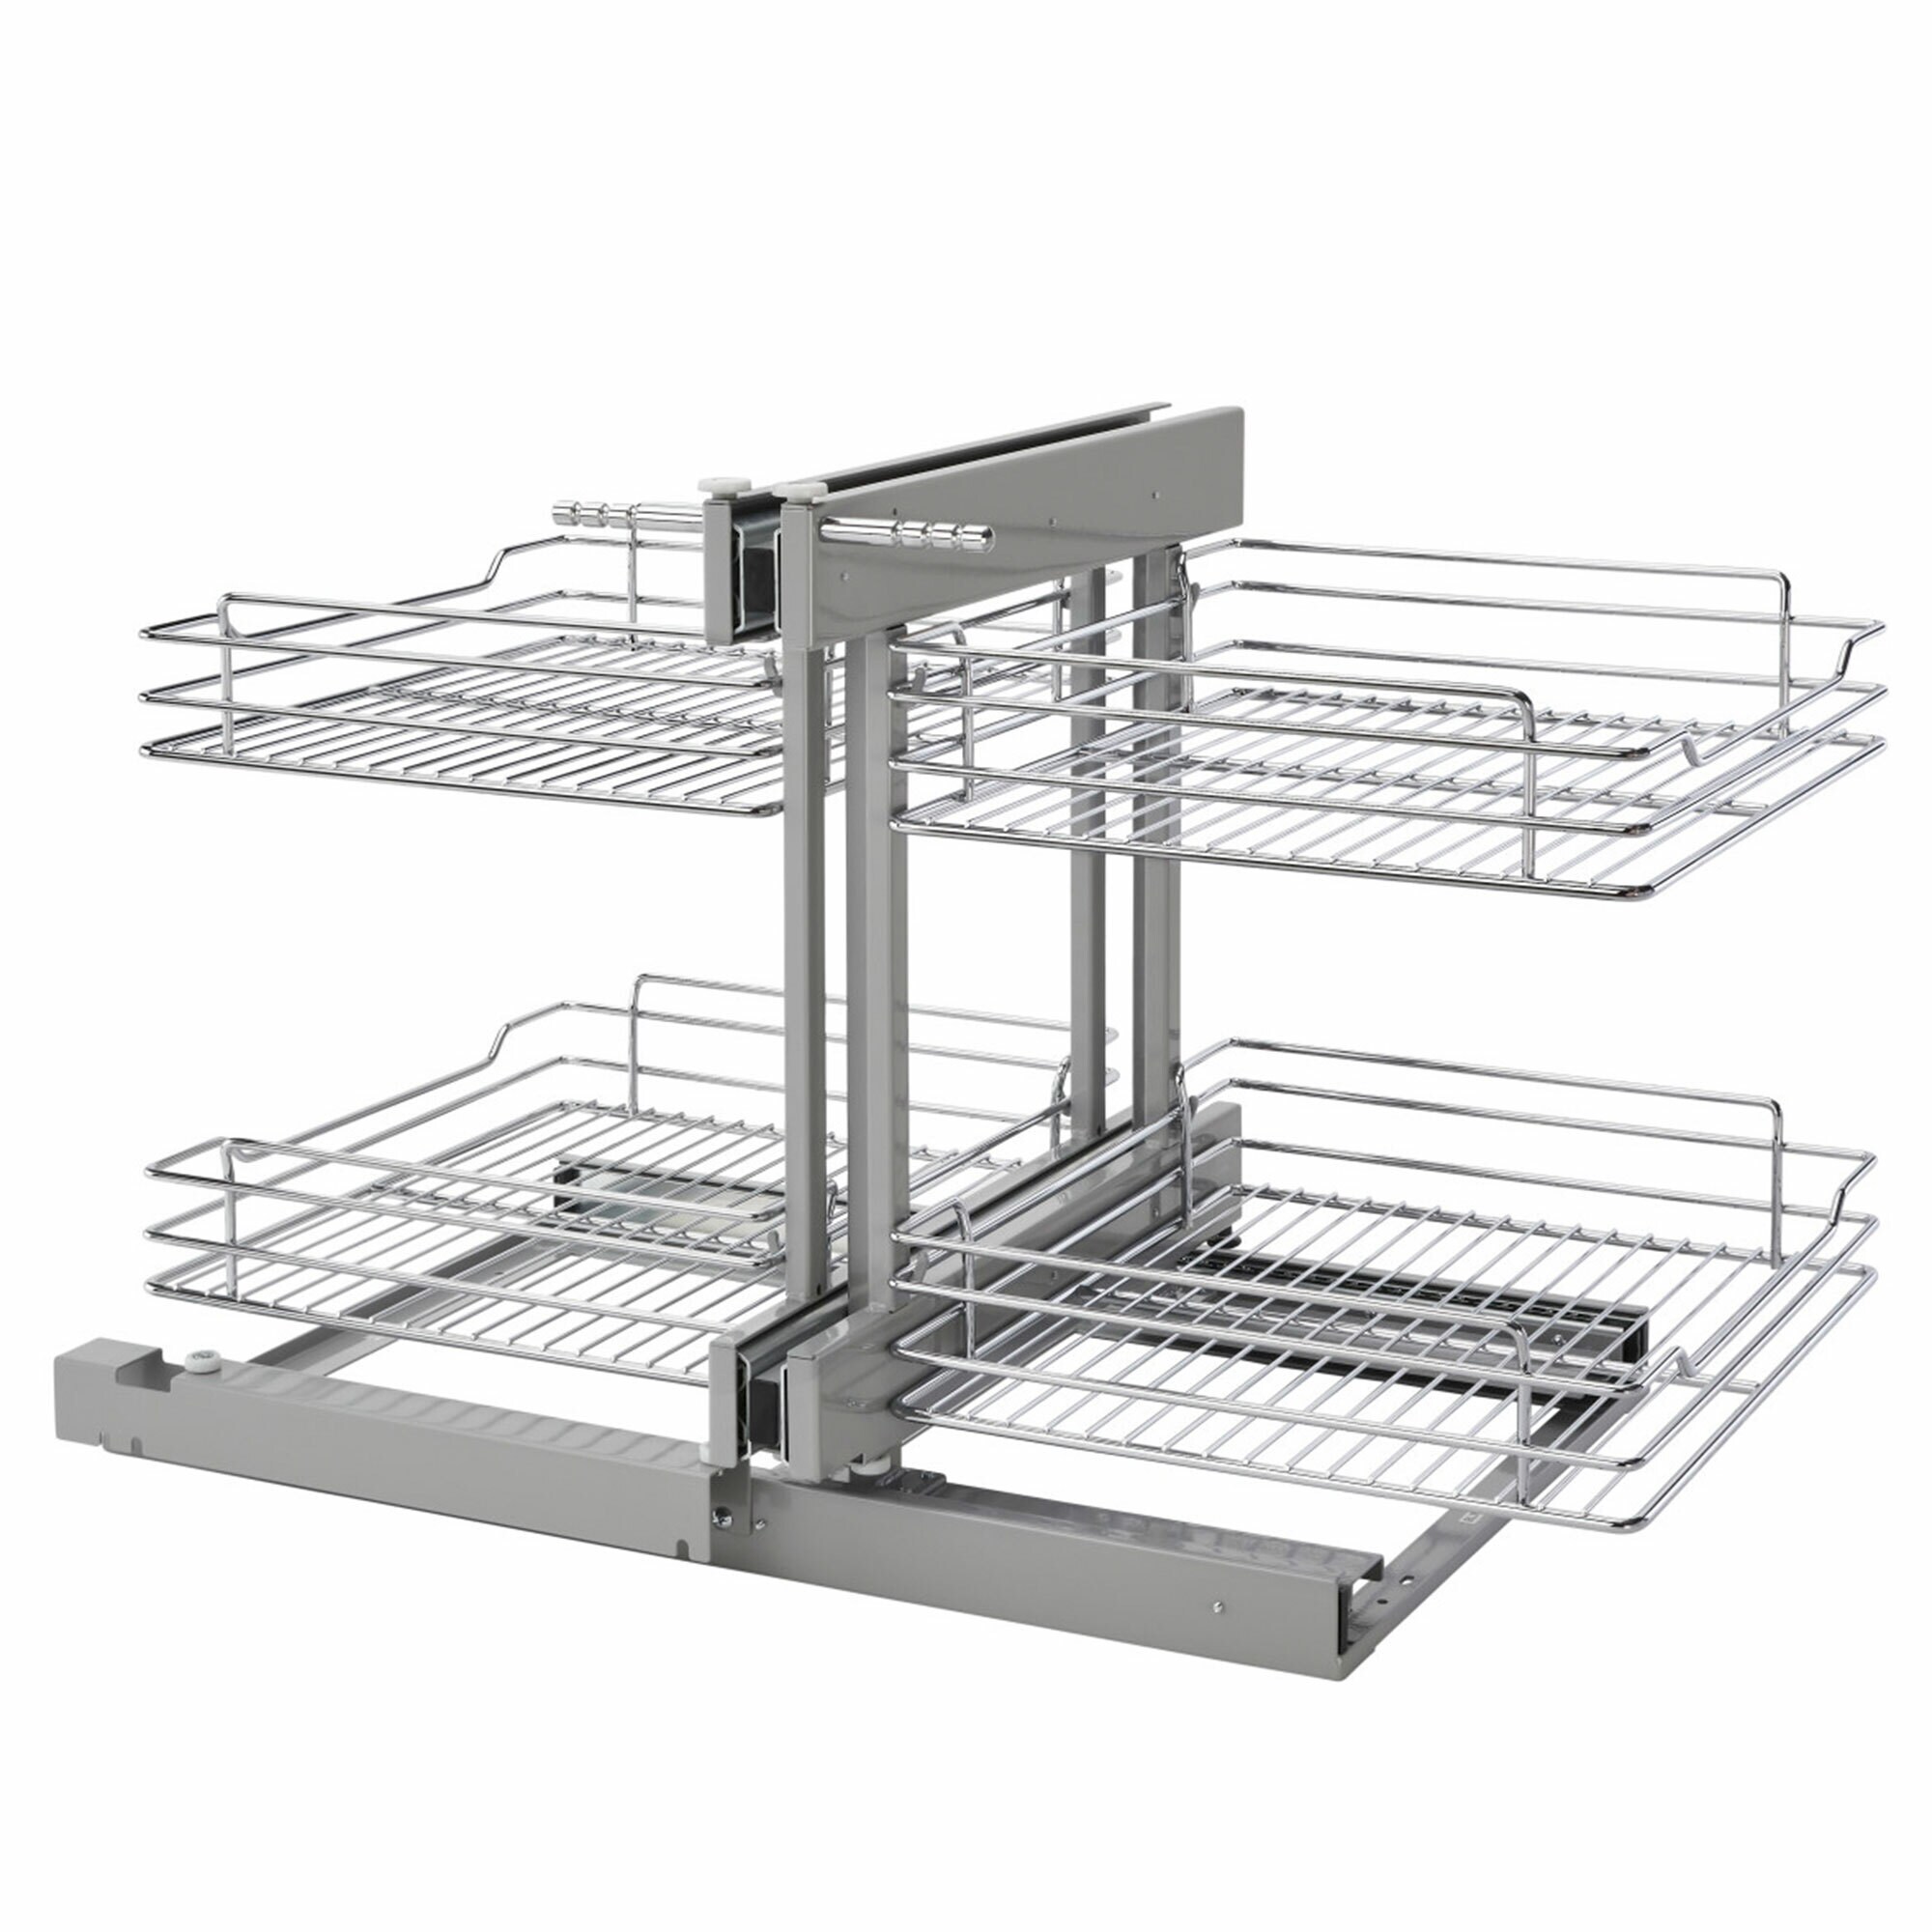 Rev-A-Shelf 21 in Two-Tier Organizer for A Blind Right